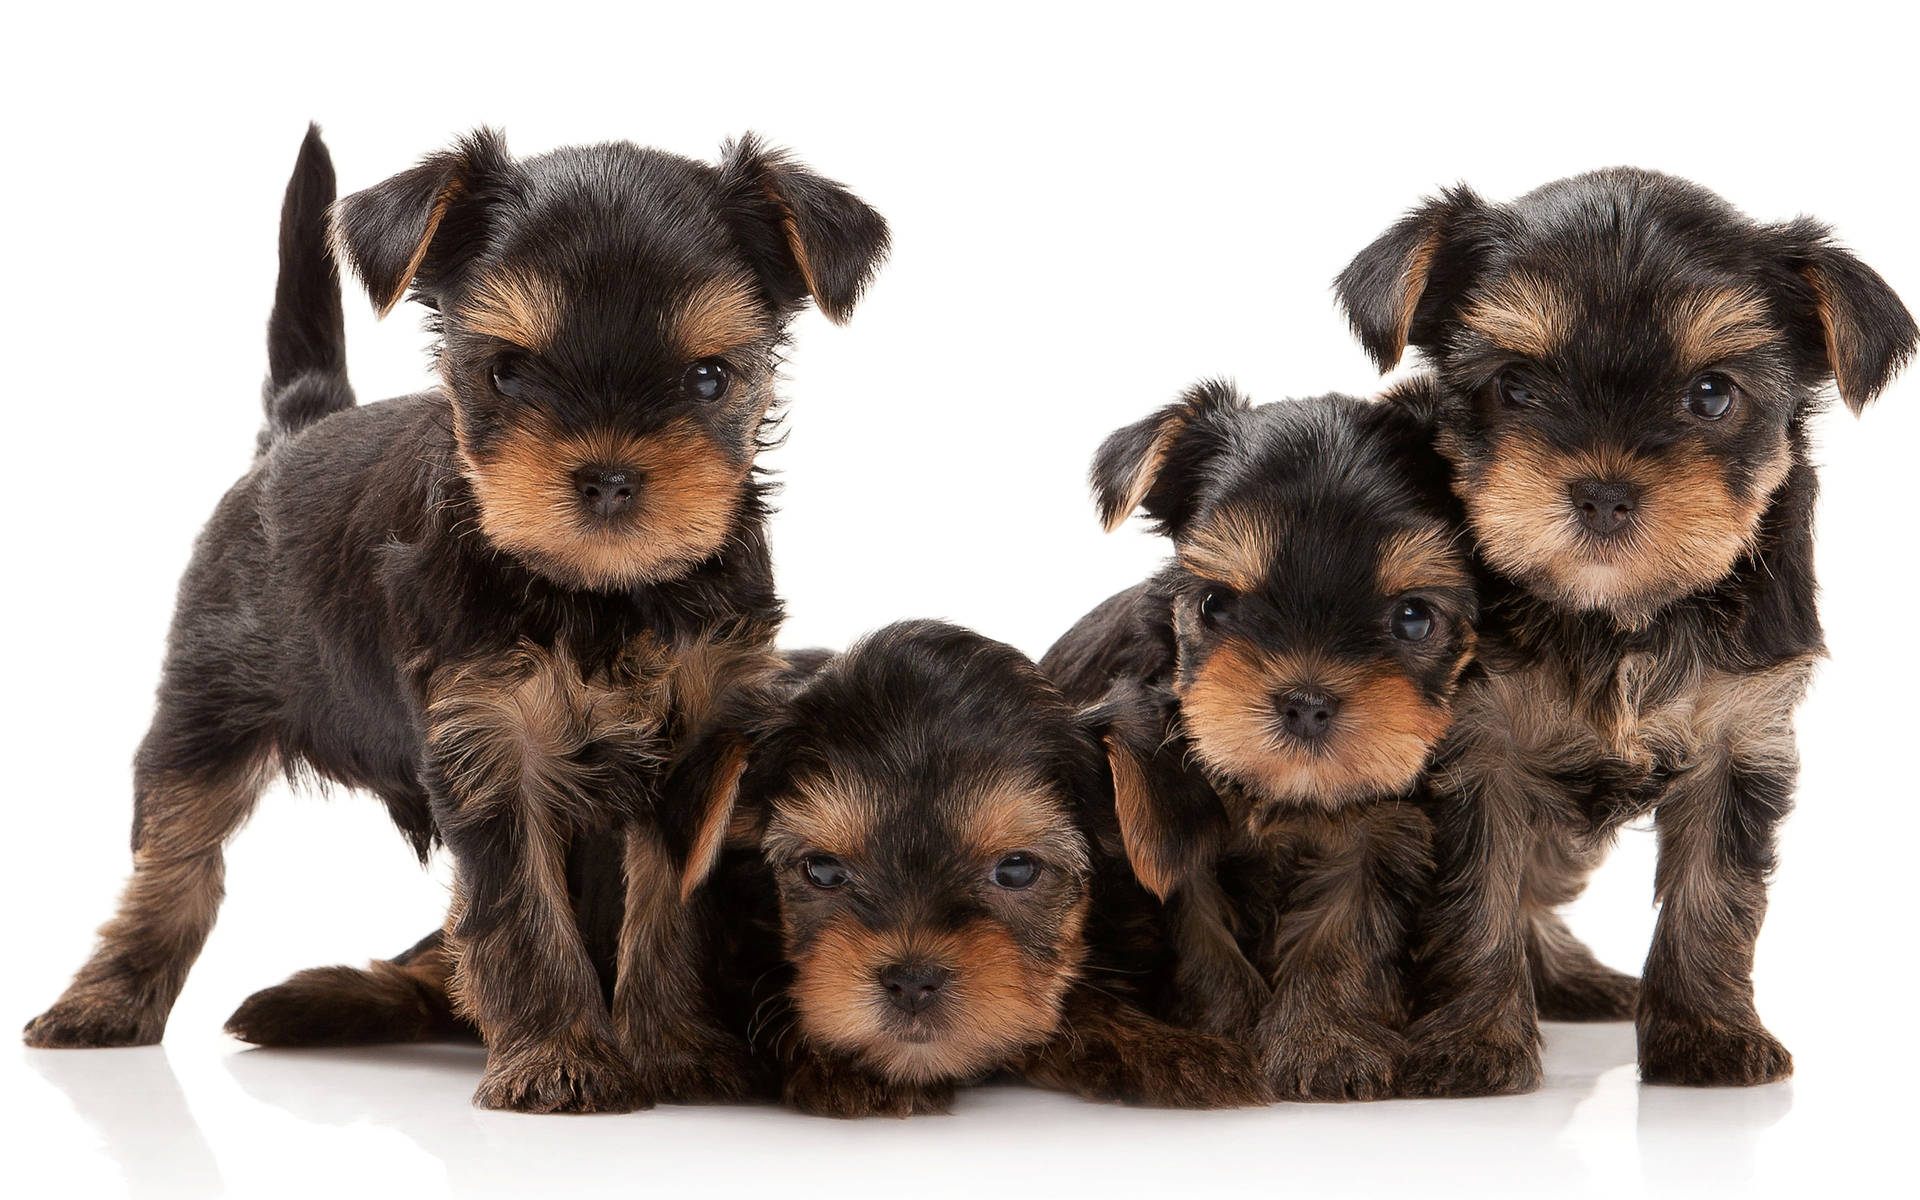 Adorable Family Portrait of Purebred Yorkie Puppies Wallpaper